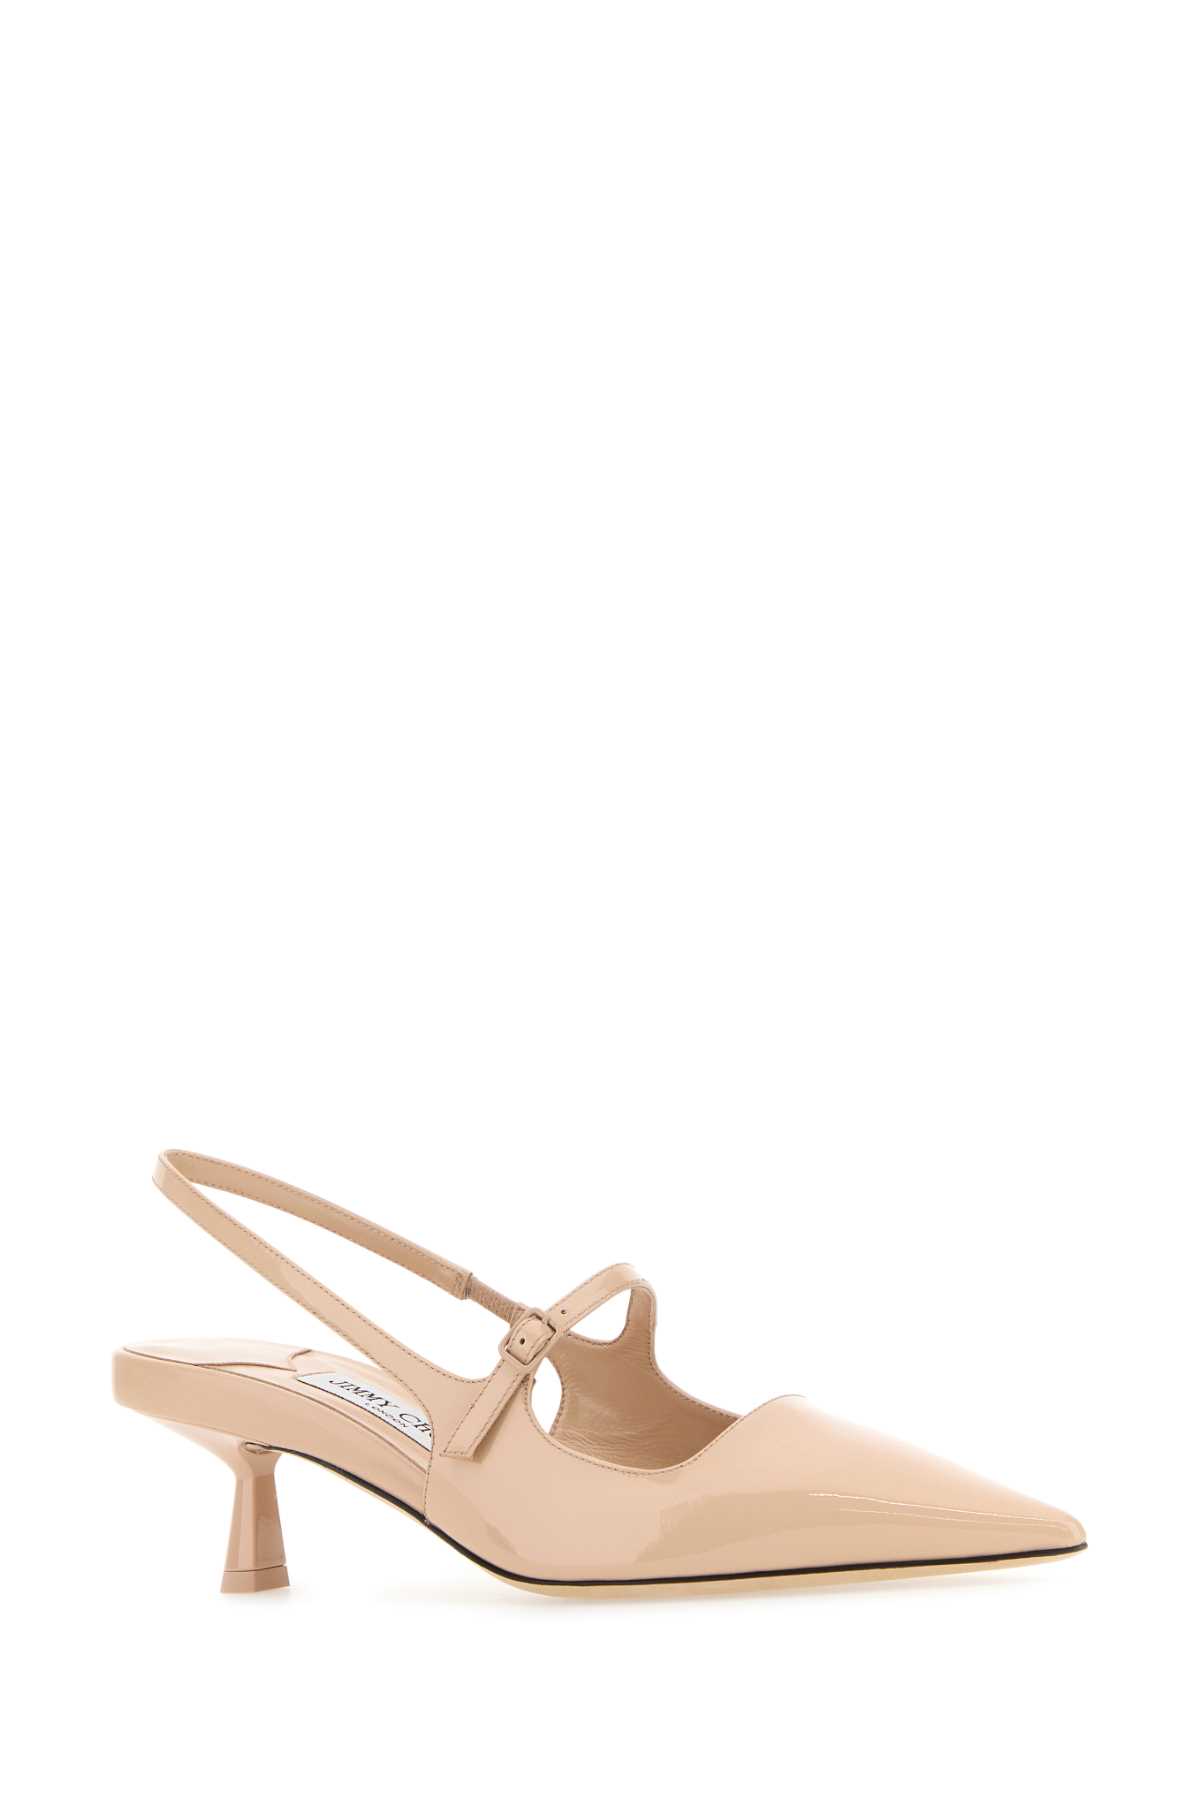 Shop Jimmy Choo Light Pink Leather Didi Pumps In Macaron